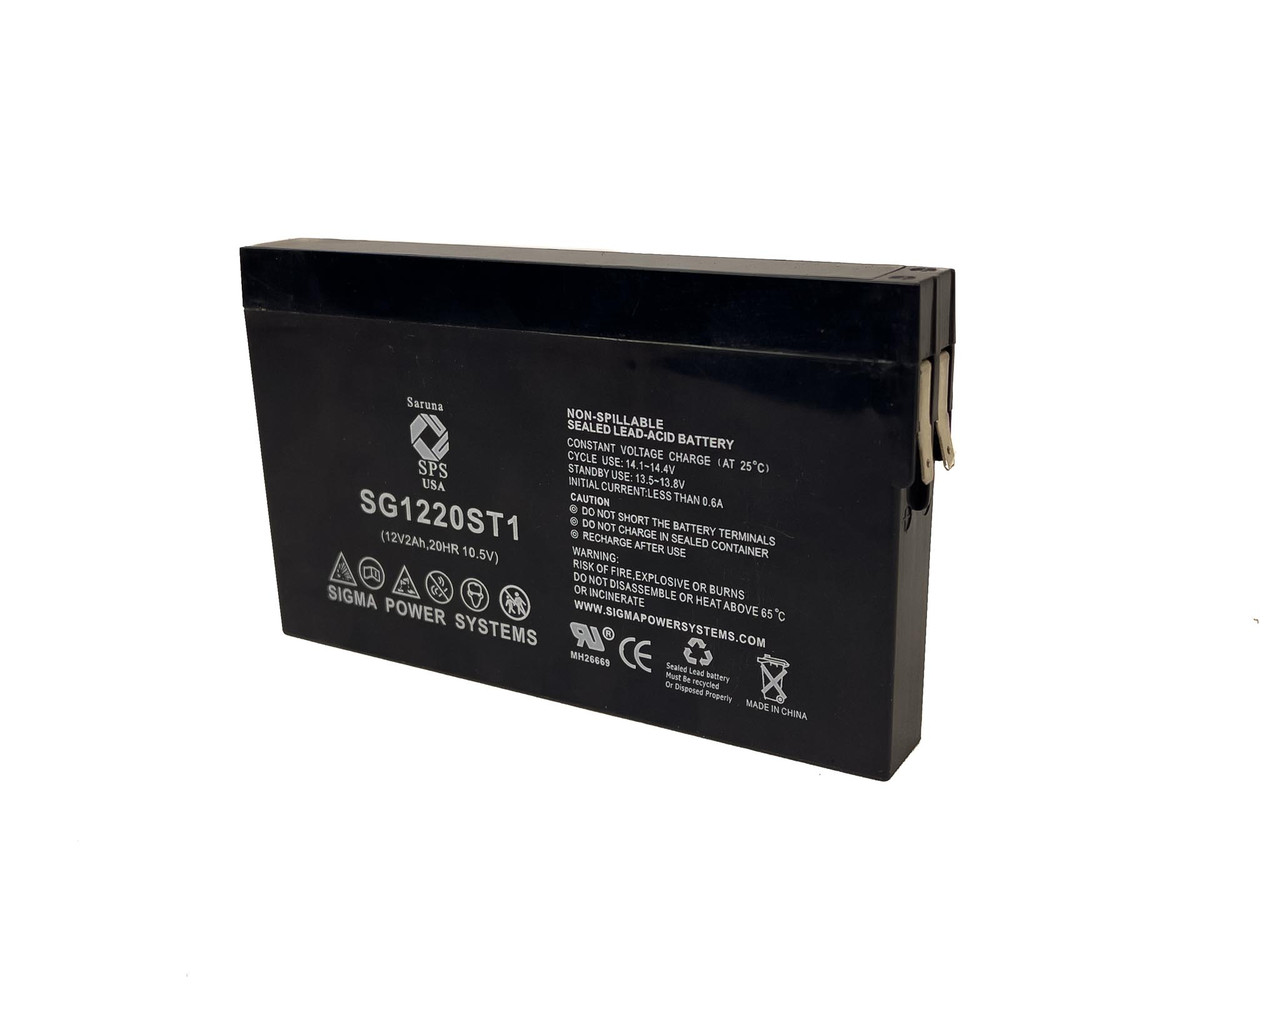 Raion Power 12V 2Ah Non-Spillable Replacement Rechargebale Battery for PPG ST511 Stats Scope